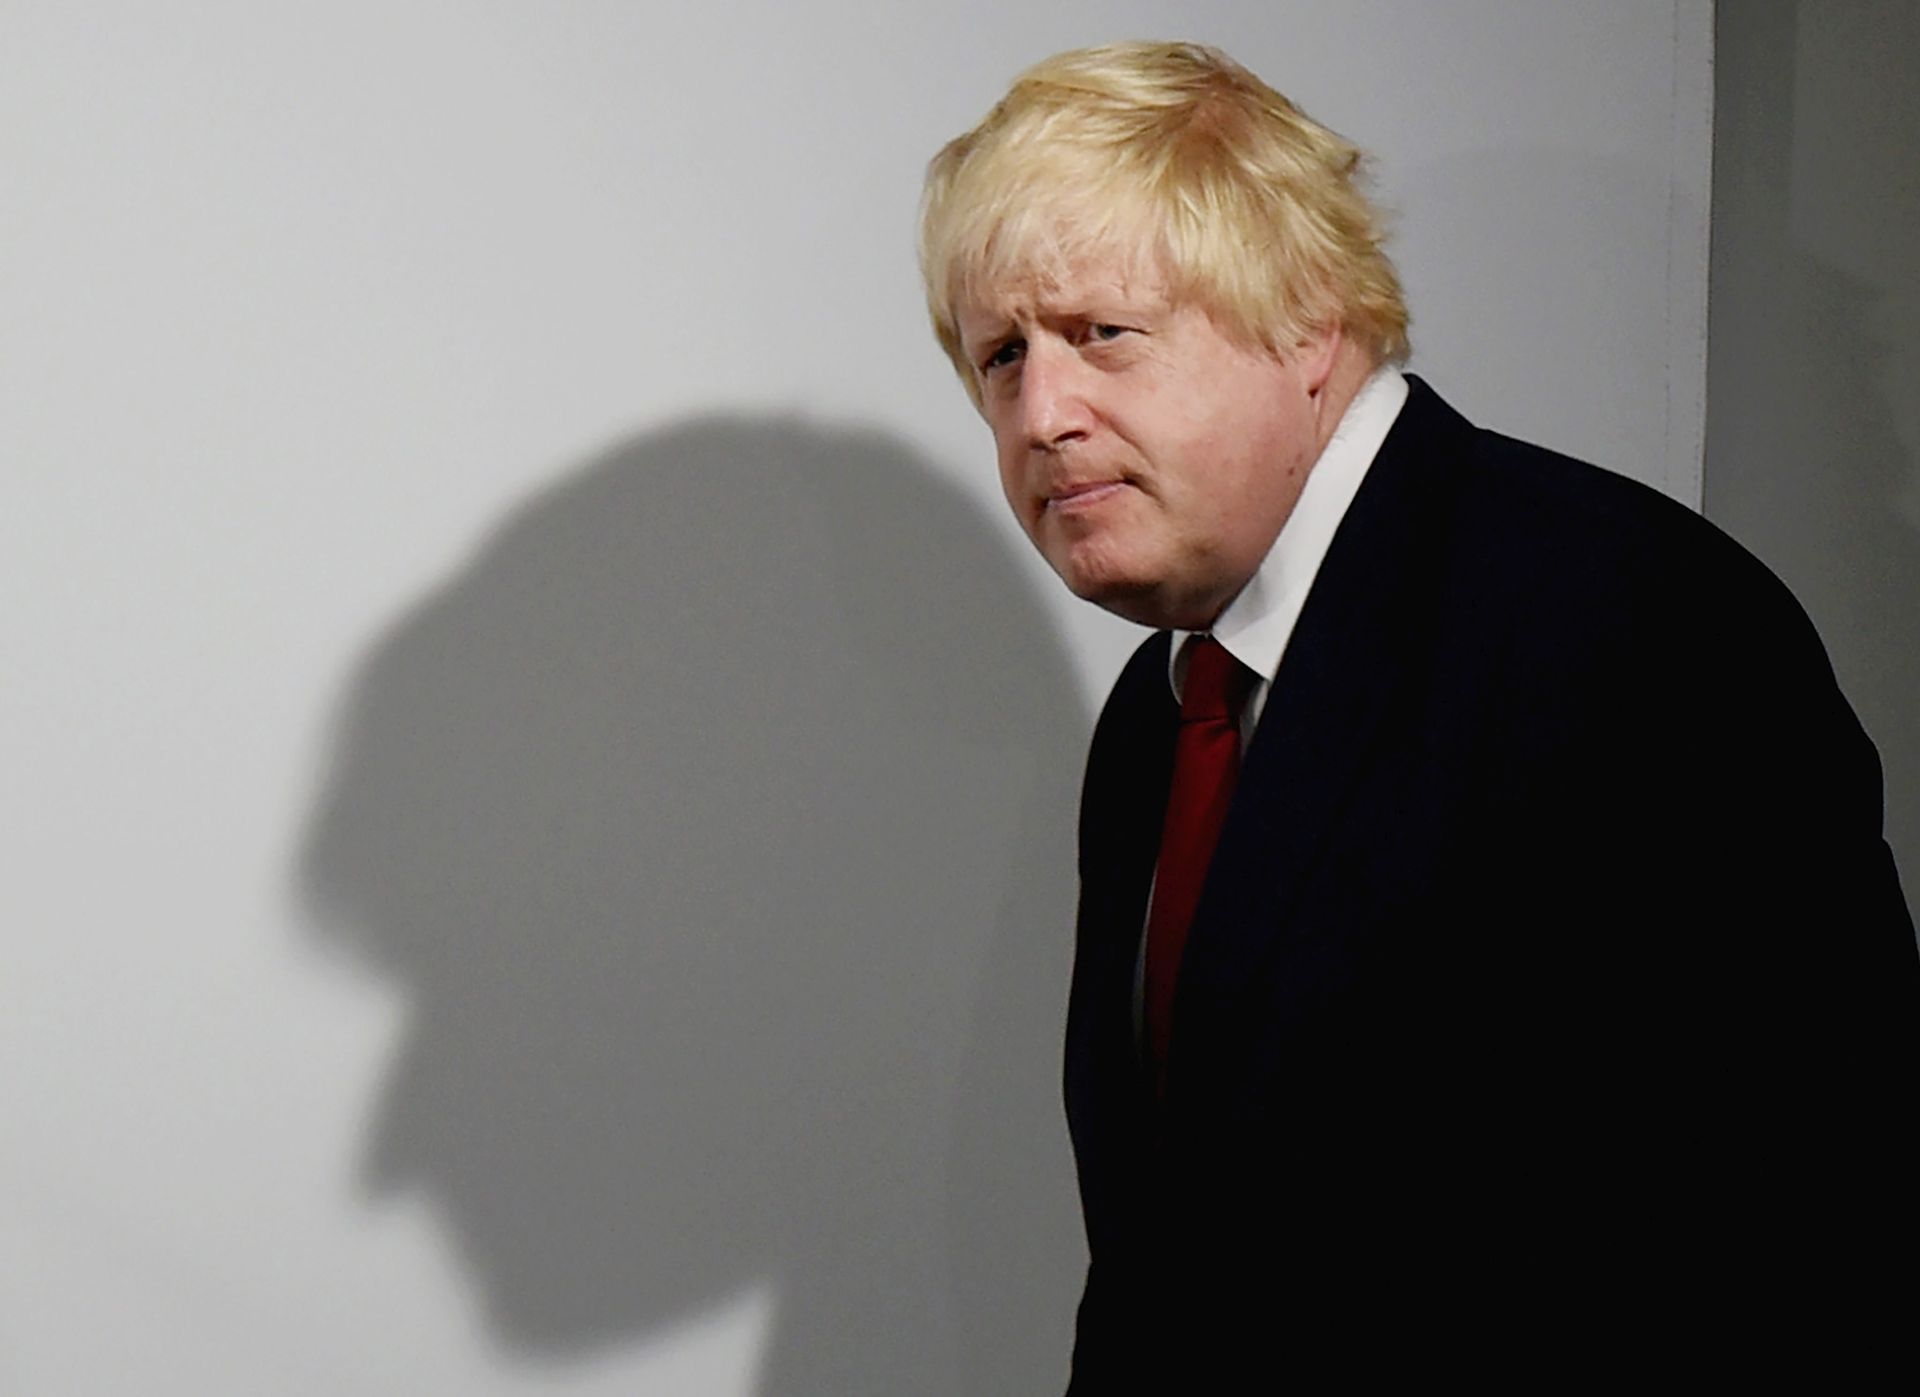 epa05387697 Boris Johnson arrives to a press briefing after their Vote Leave campaign won the United Kingdom's EU referendum, in London, Britain, 24 June 2016. Media reports on early 24 June, indicated that 51.9 per cent voted in favour of the UK leaving the EU while 48.1 per cent voted for remaining in.  EPA/MARY TURNER/POOL